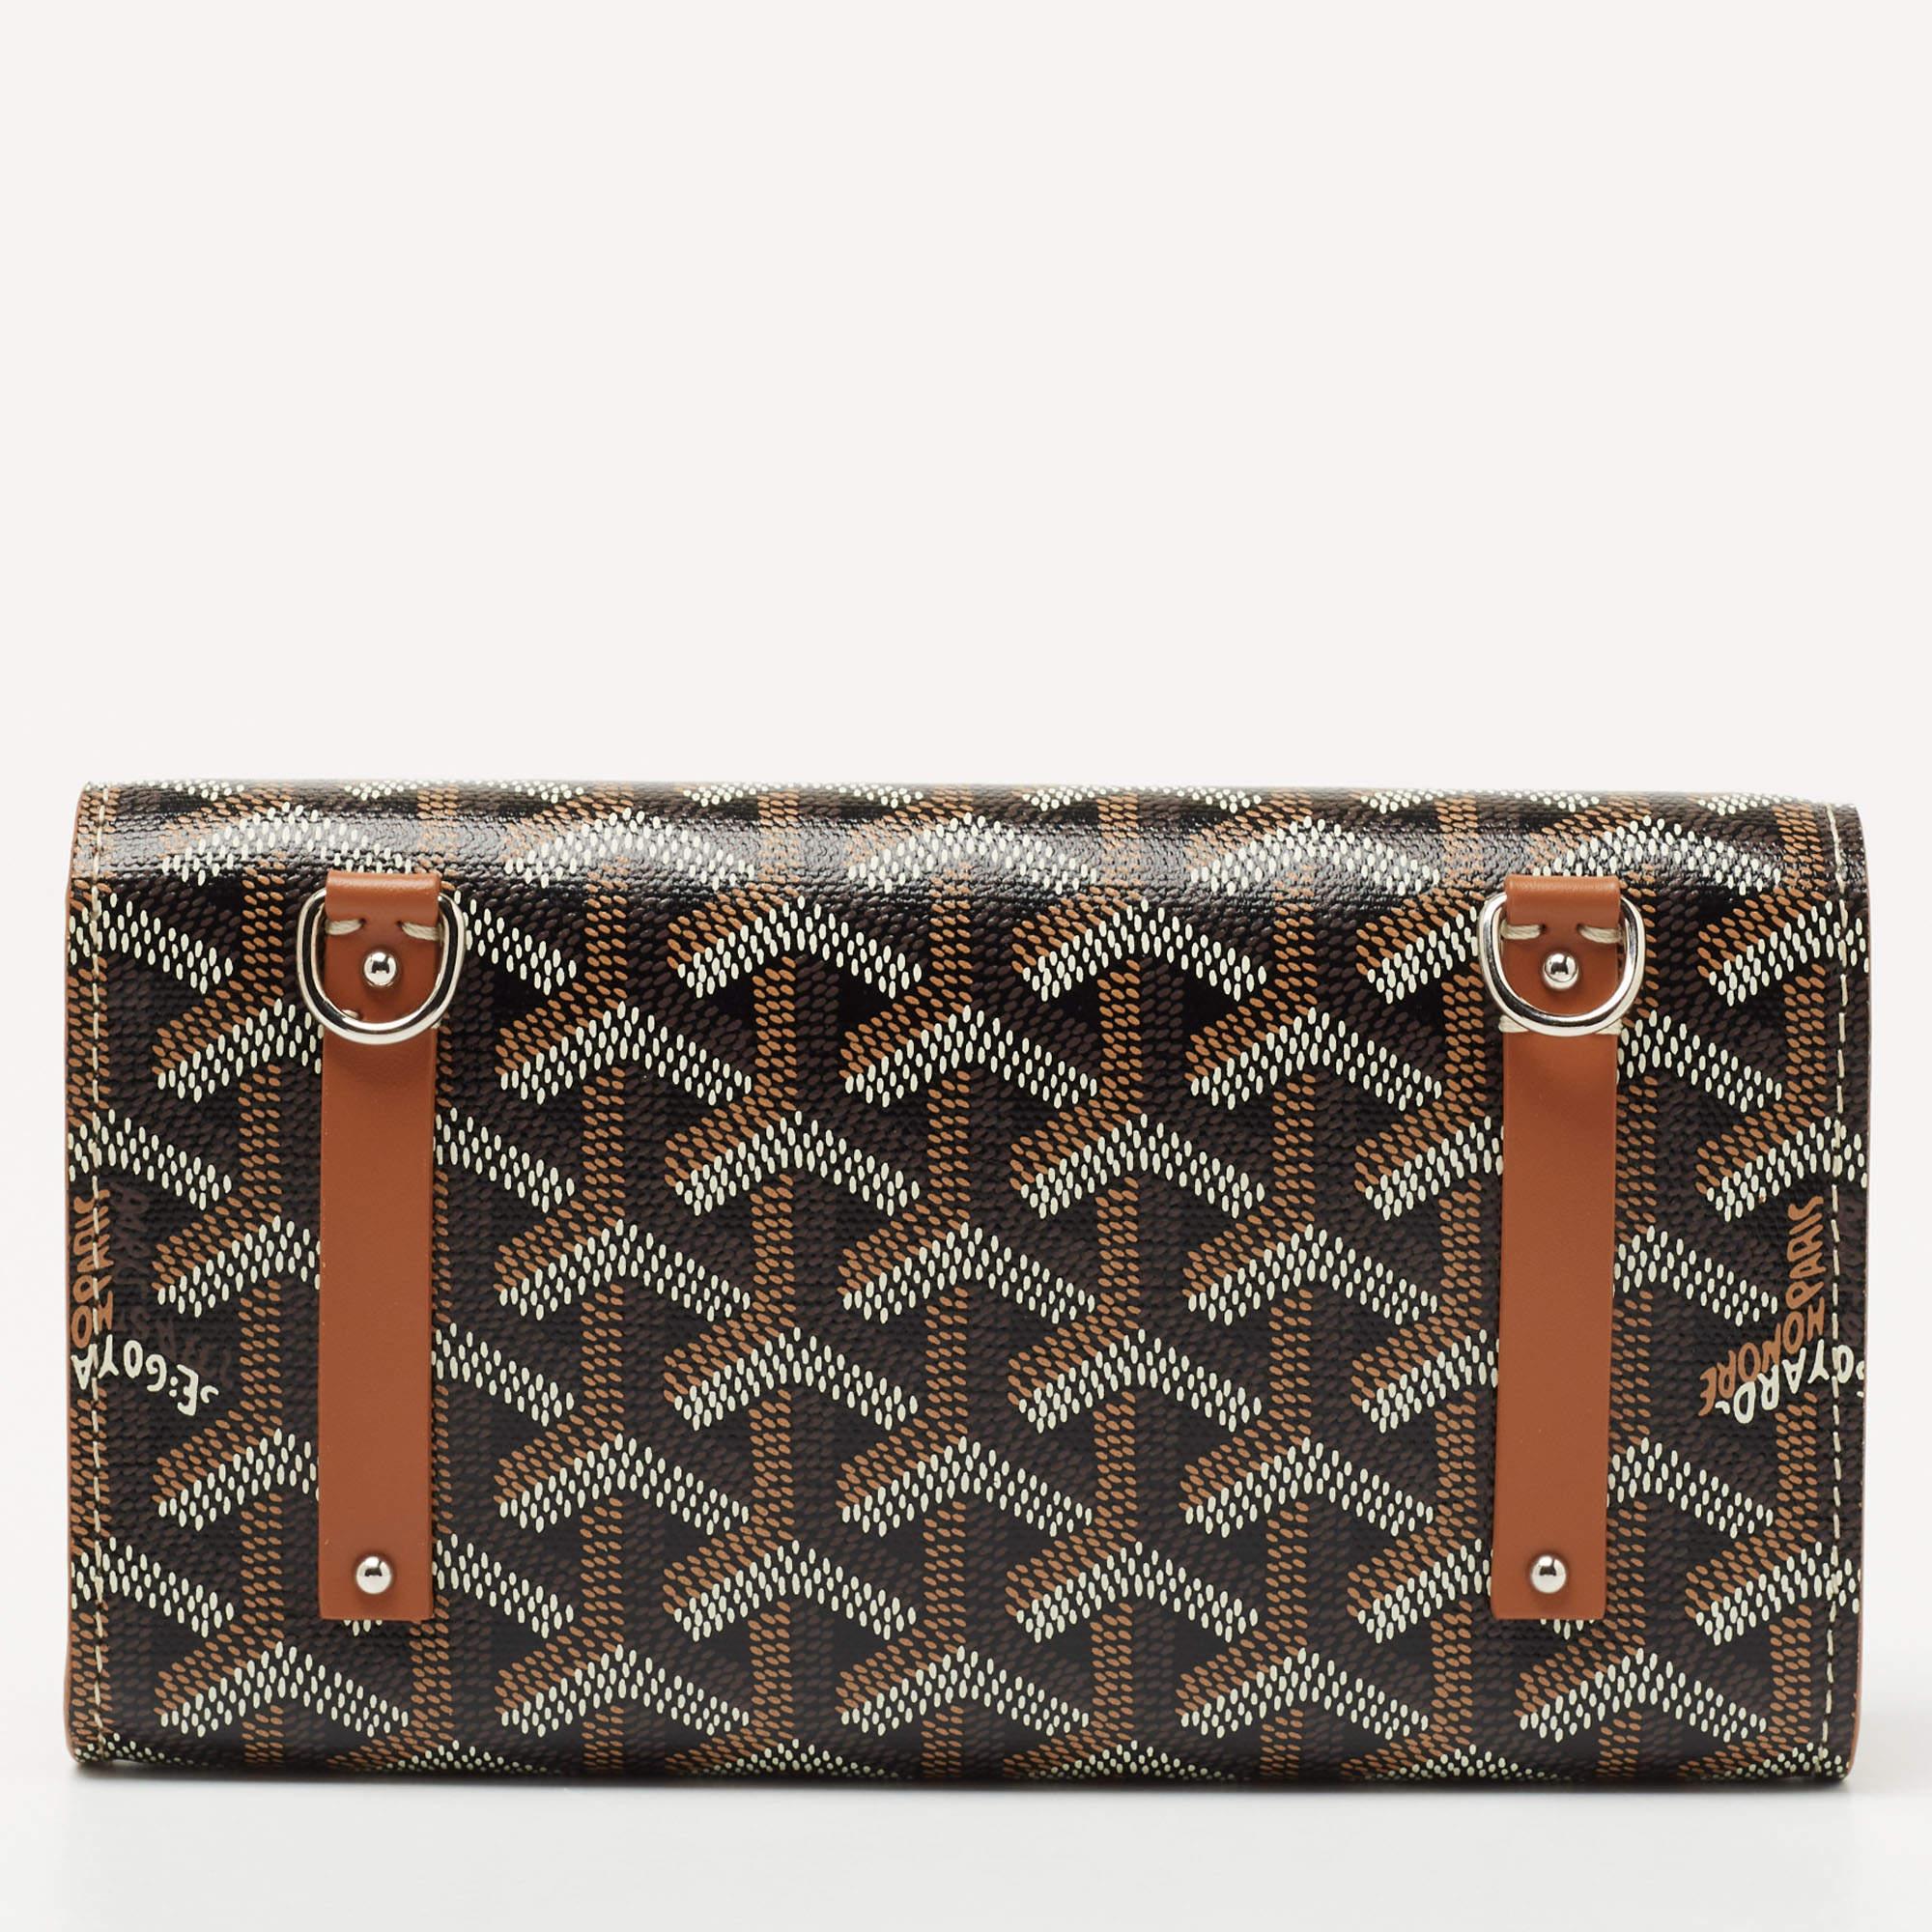 Luxuriously crafted by the House of Goyard, this Monte Carlo Bois clutch is a must-have accessory for fashion lovers. It is made from Goyardine-coated canvas on the exterior and features silver-toned fittings. It accommodates a canvas-lined